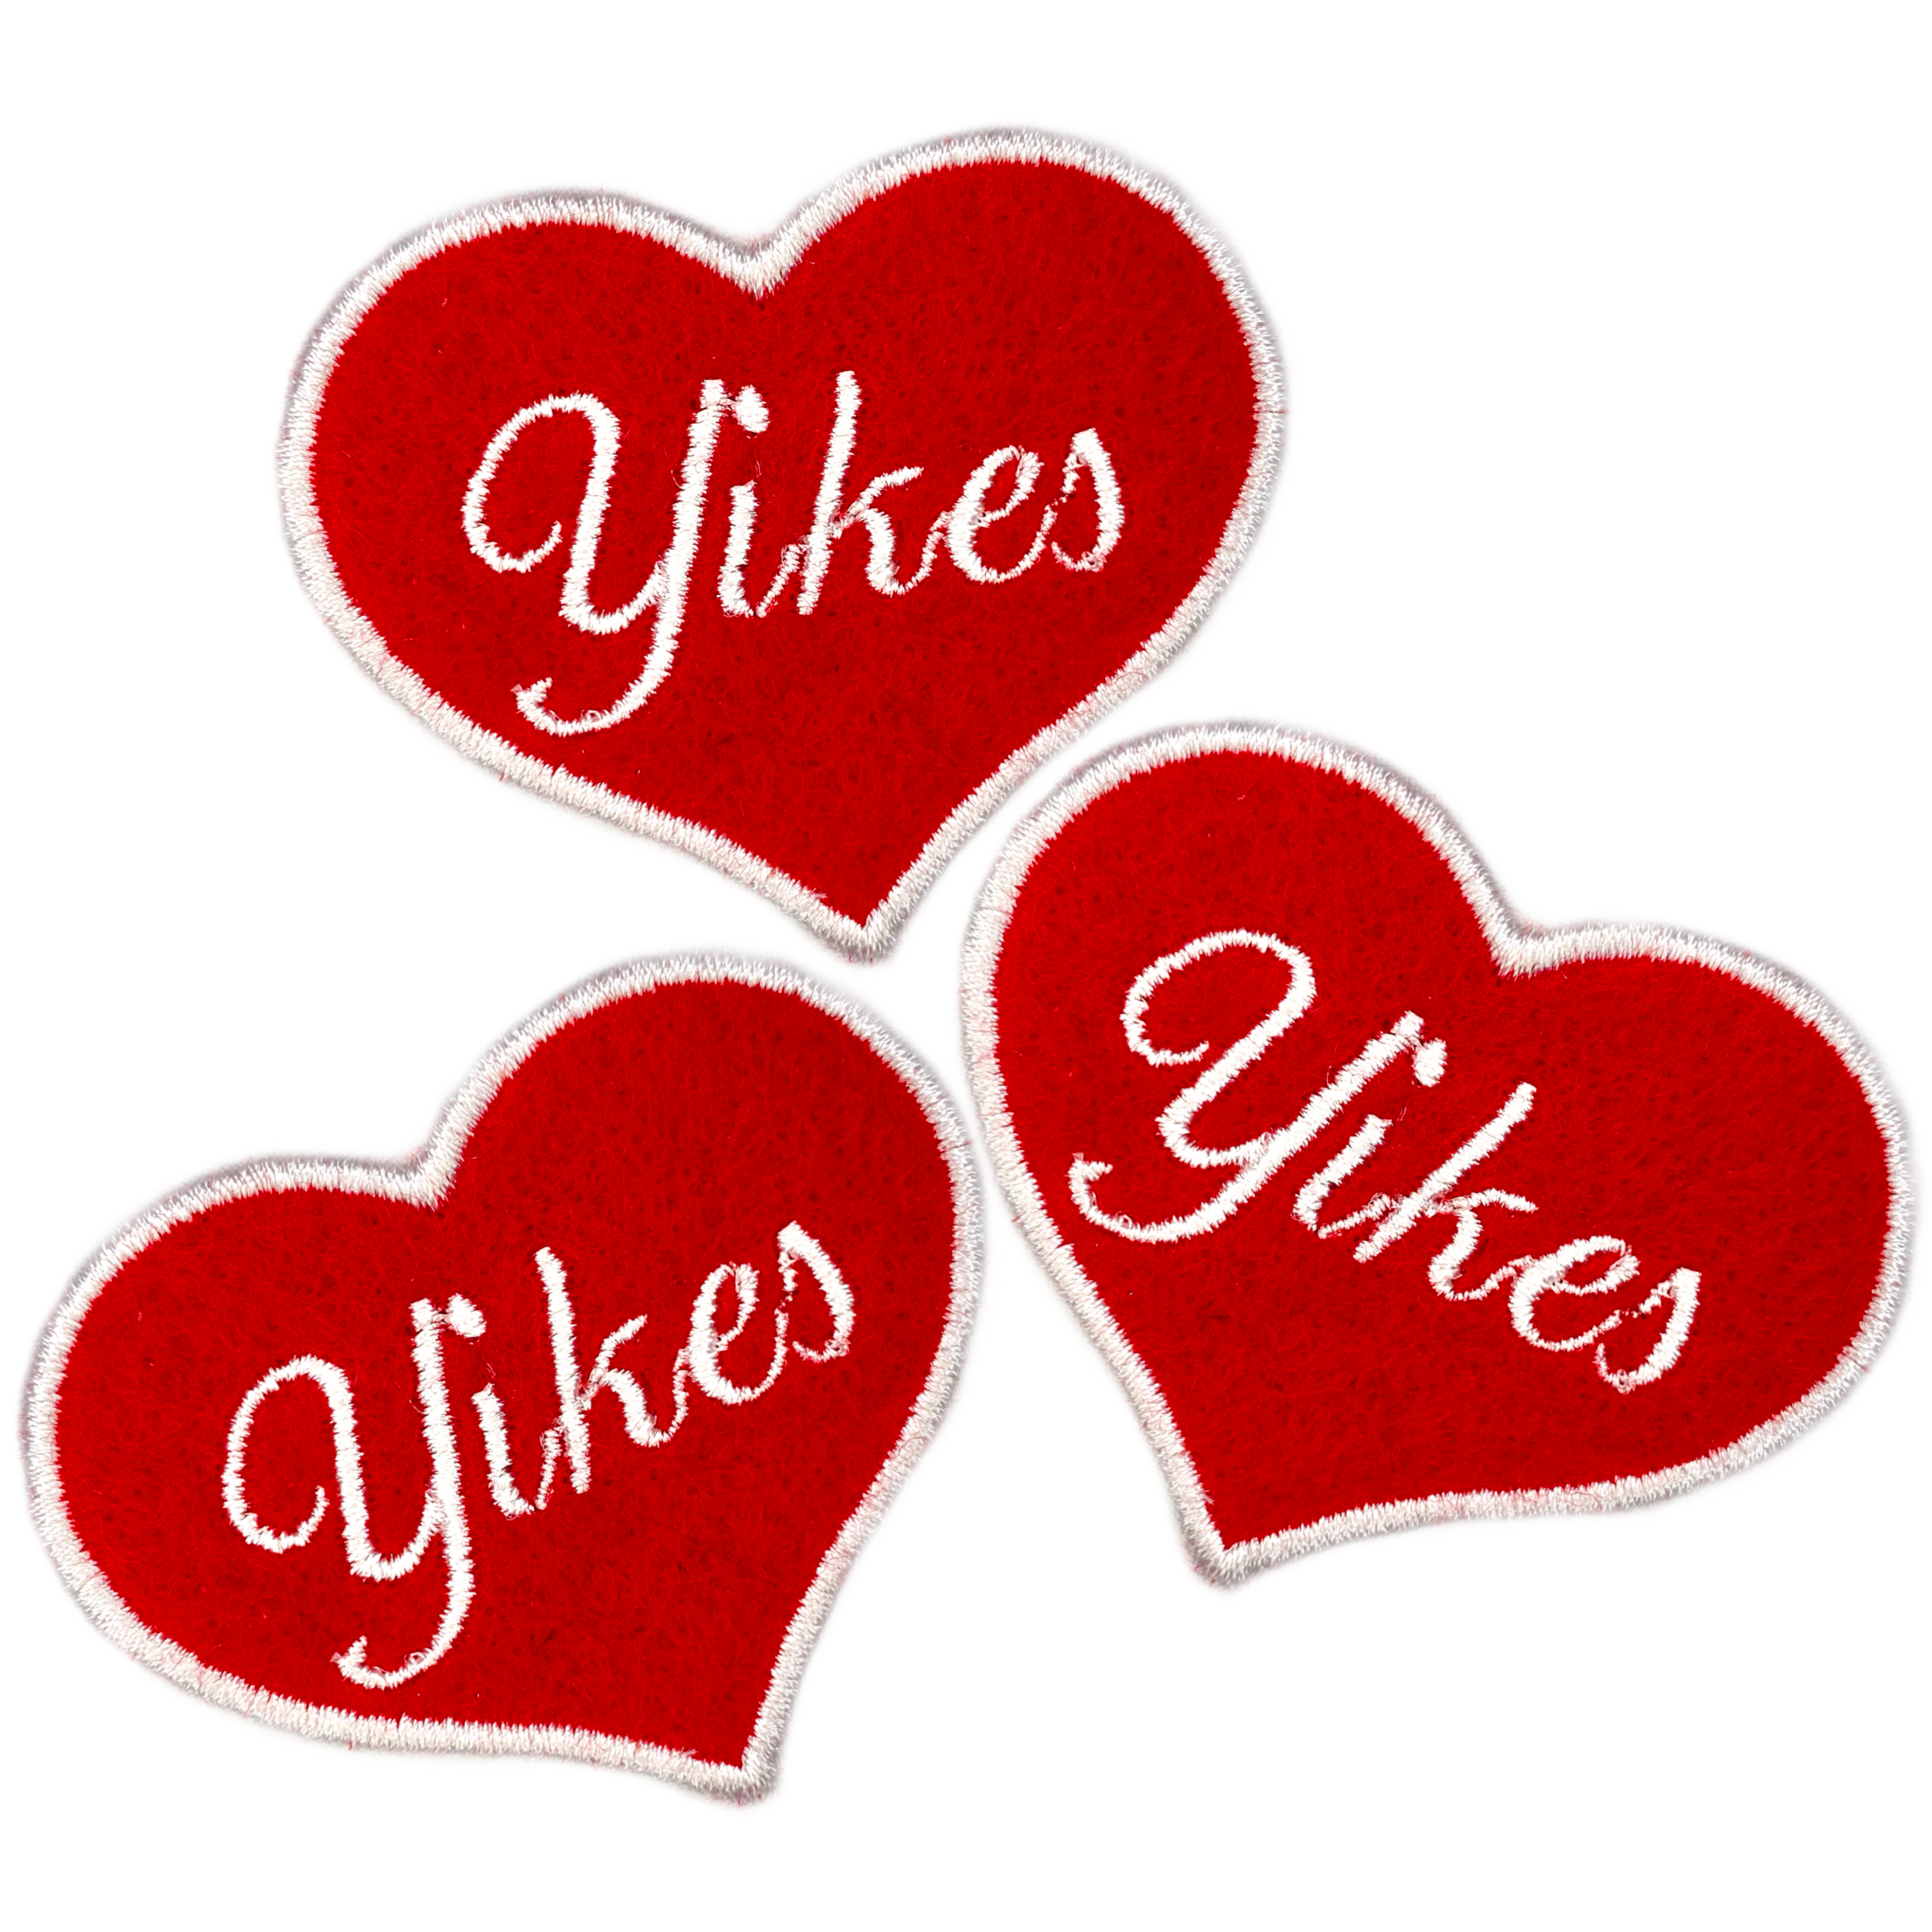 Yikes Heart Embroidered Iron-on Patch - IncredibleGood Inc